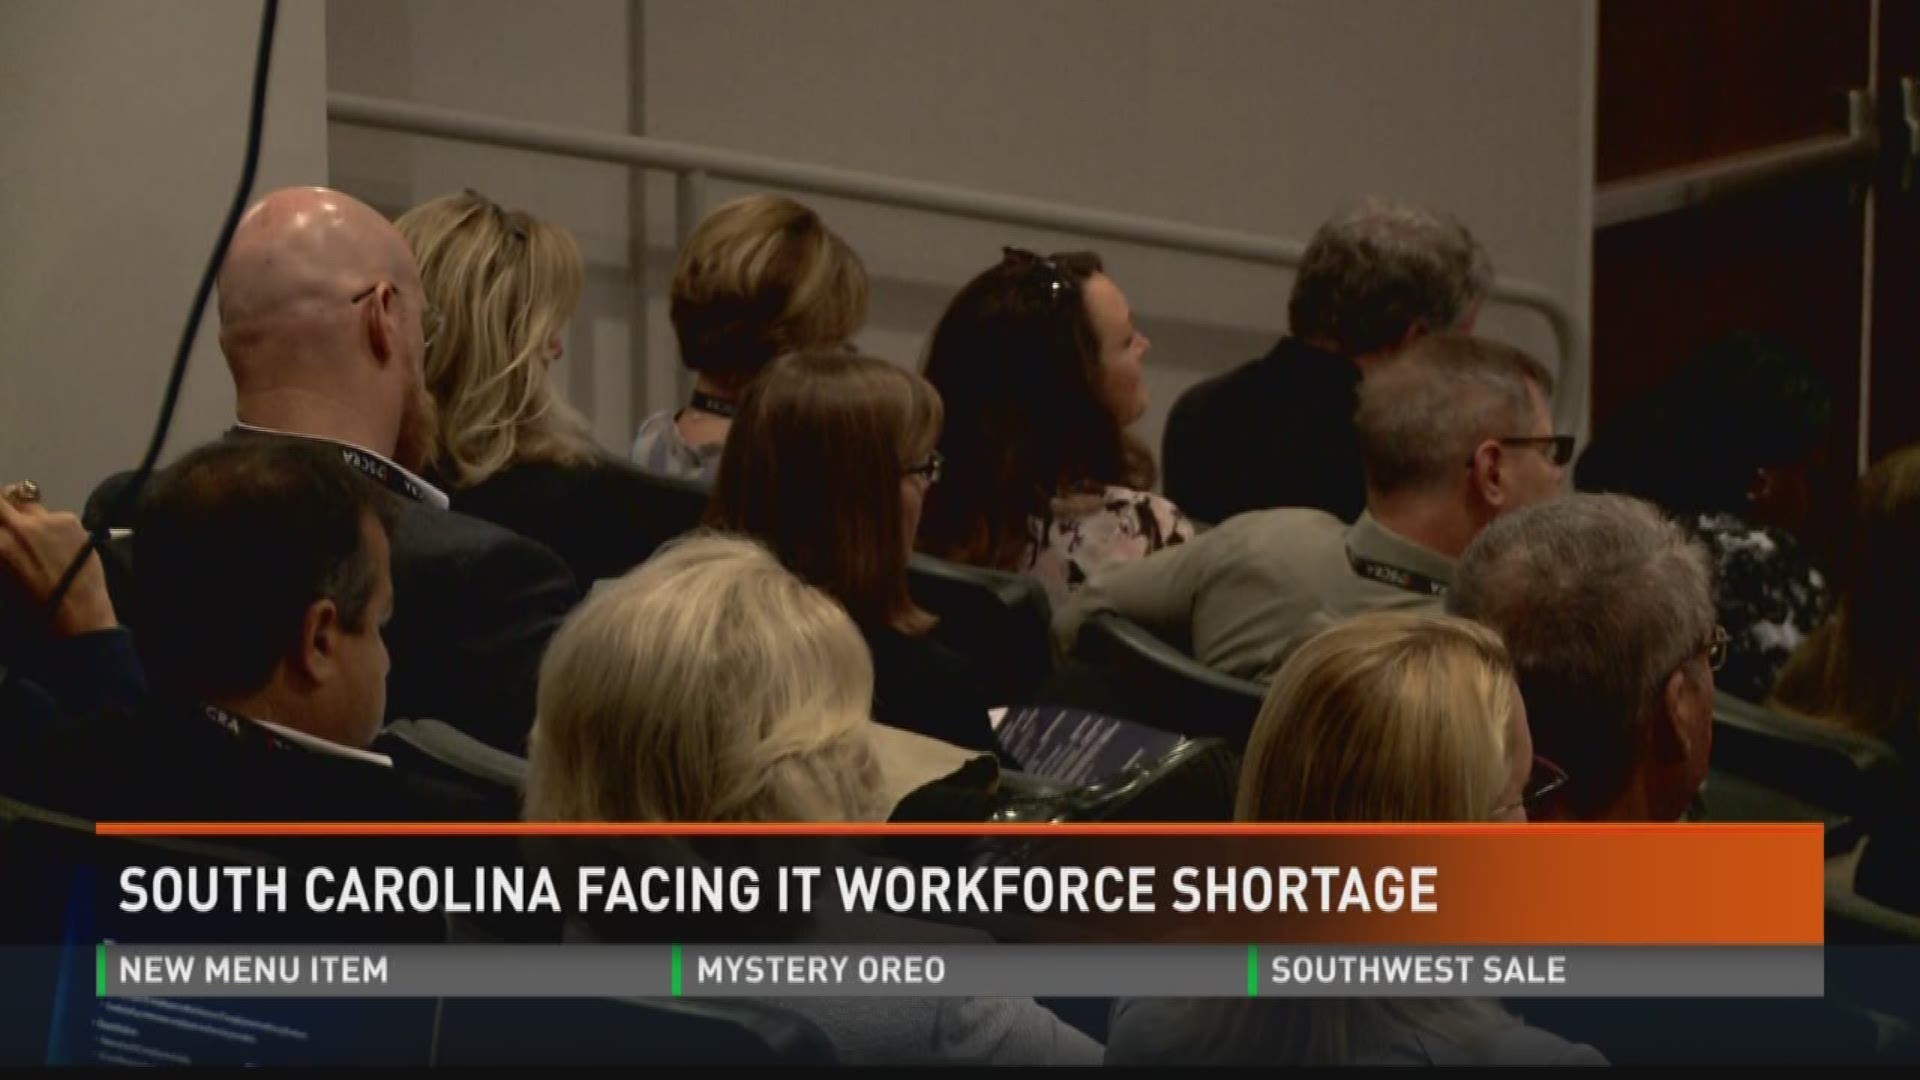 There are not enough trained IT workers to fill all the jobs in South Carolina.